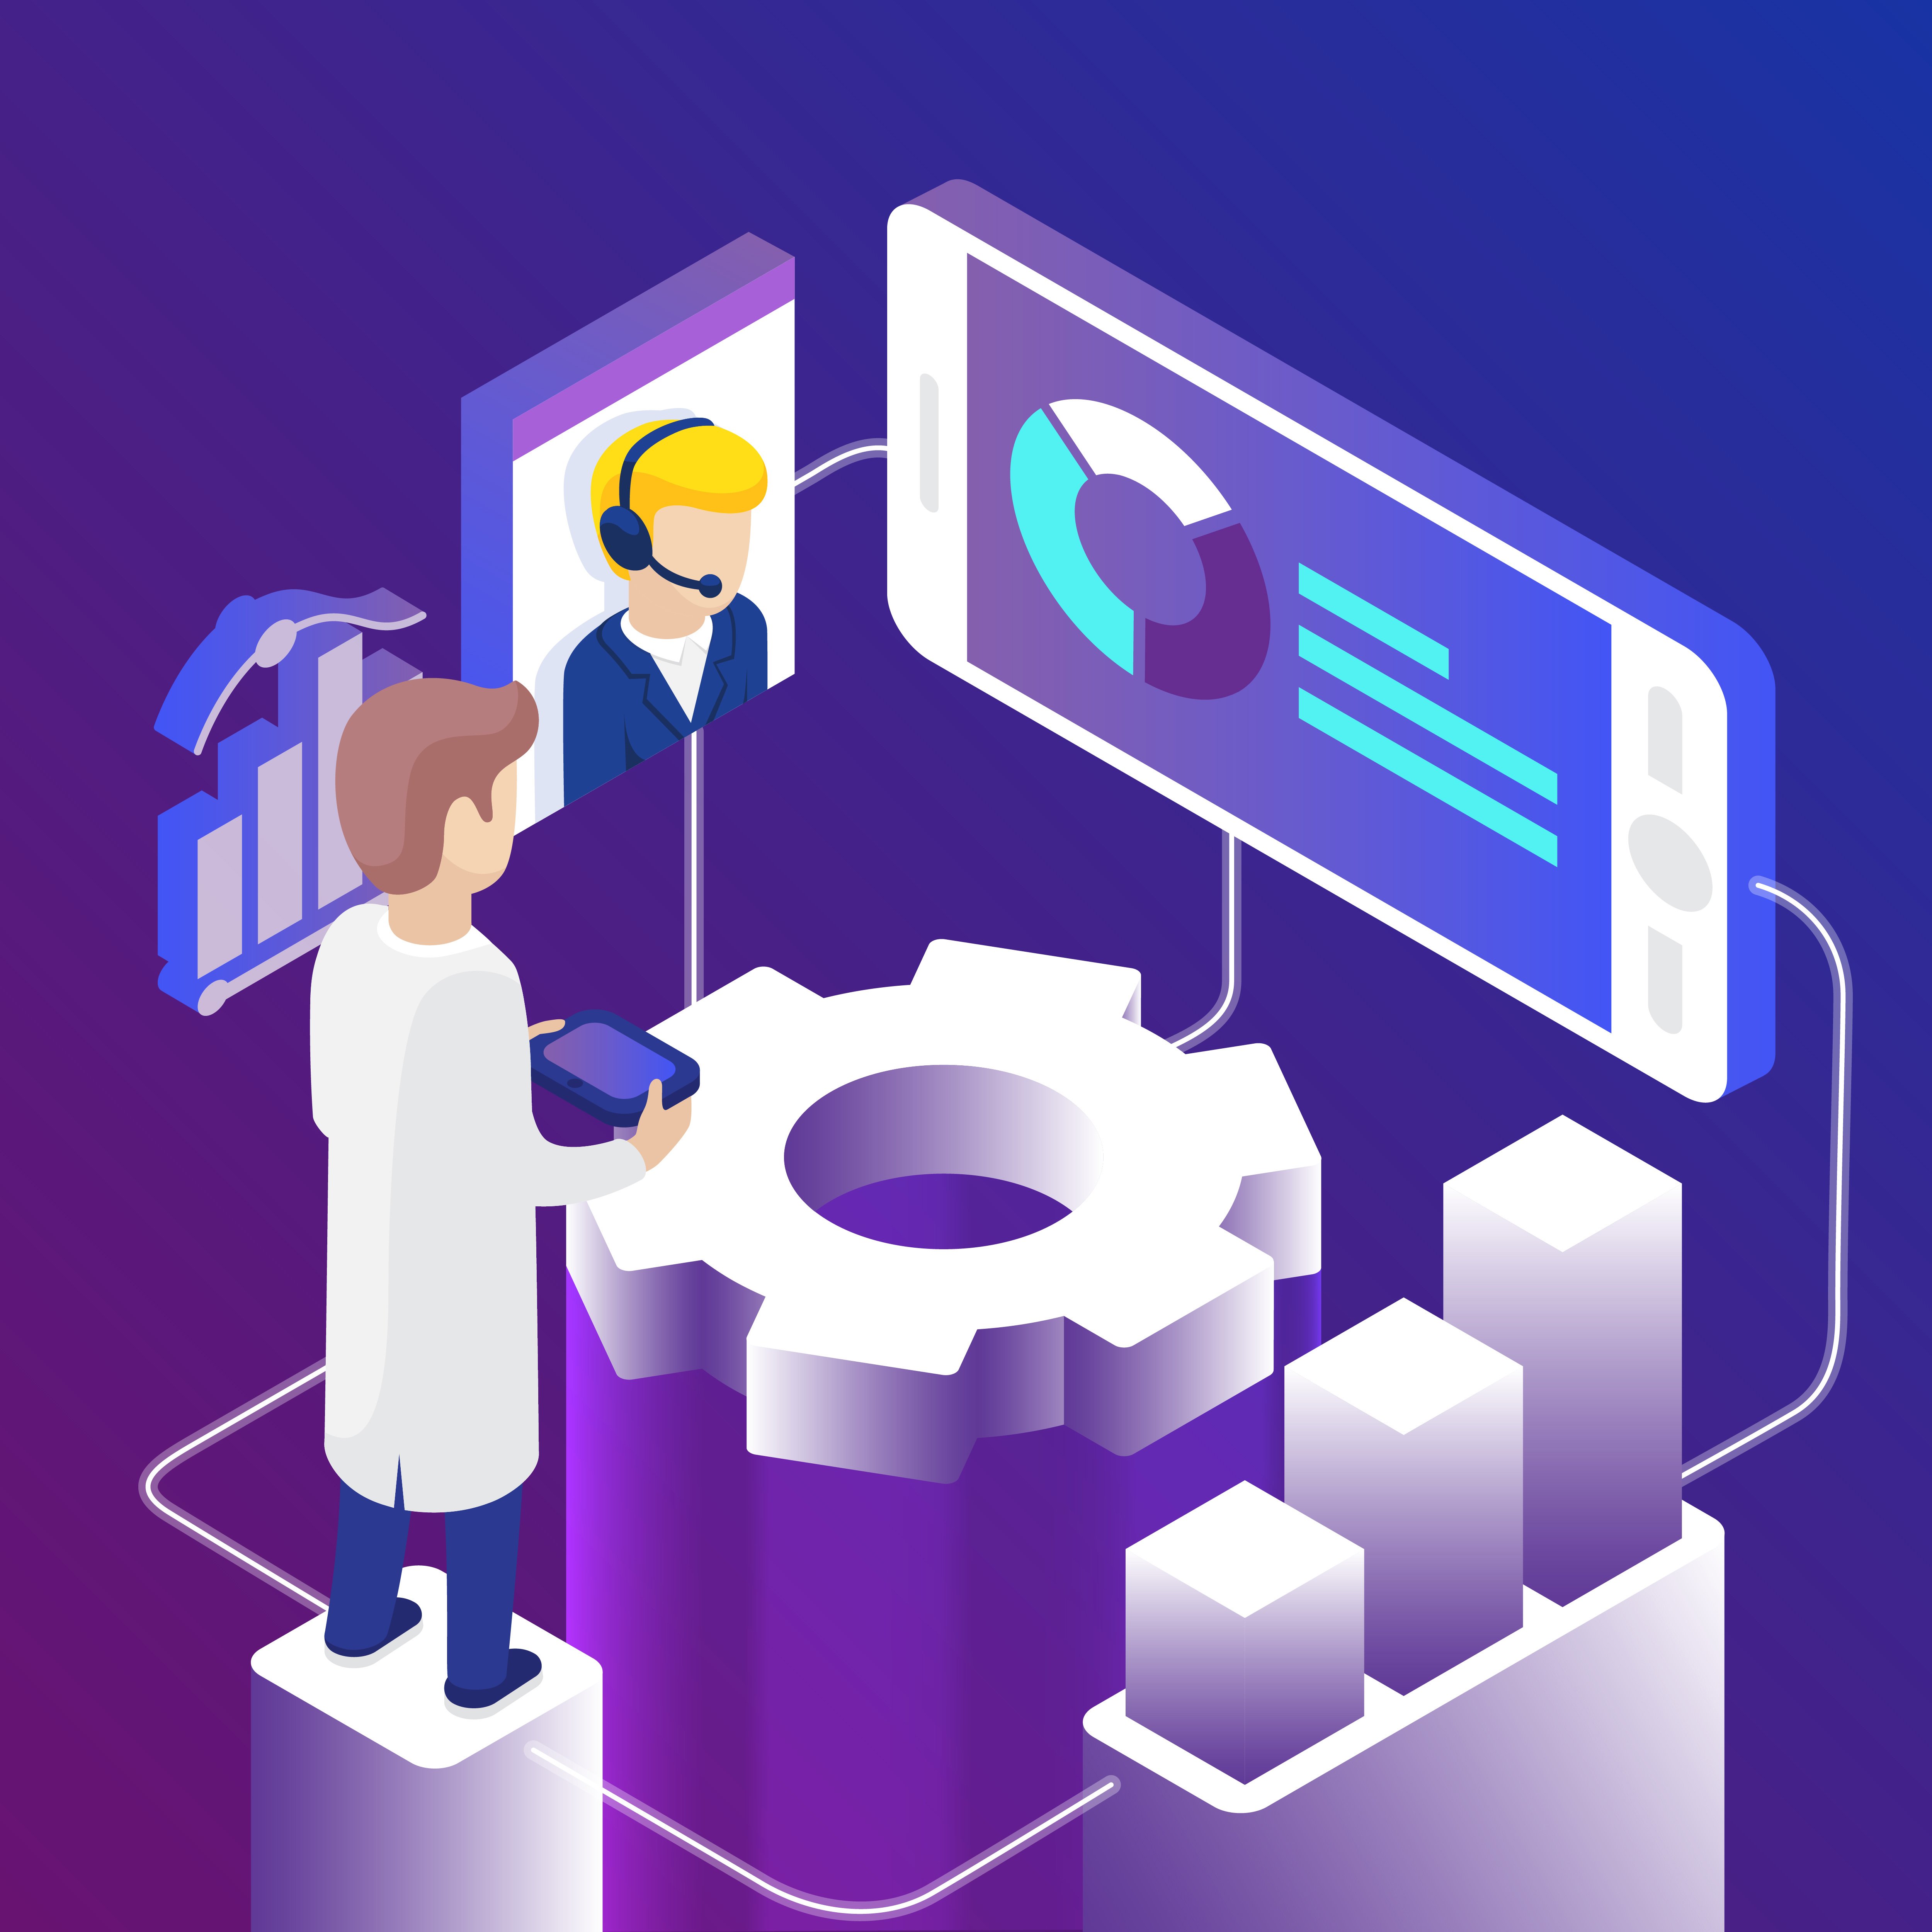 Isometric online technical support. Man with game pad, call center operator, gear and graph on screen. Online help concept. Infographic isometric vector illustration on bright violet background